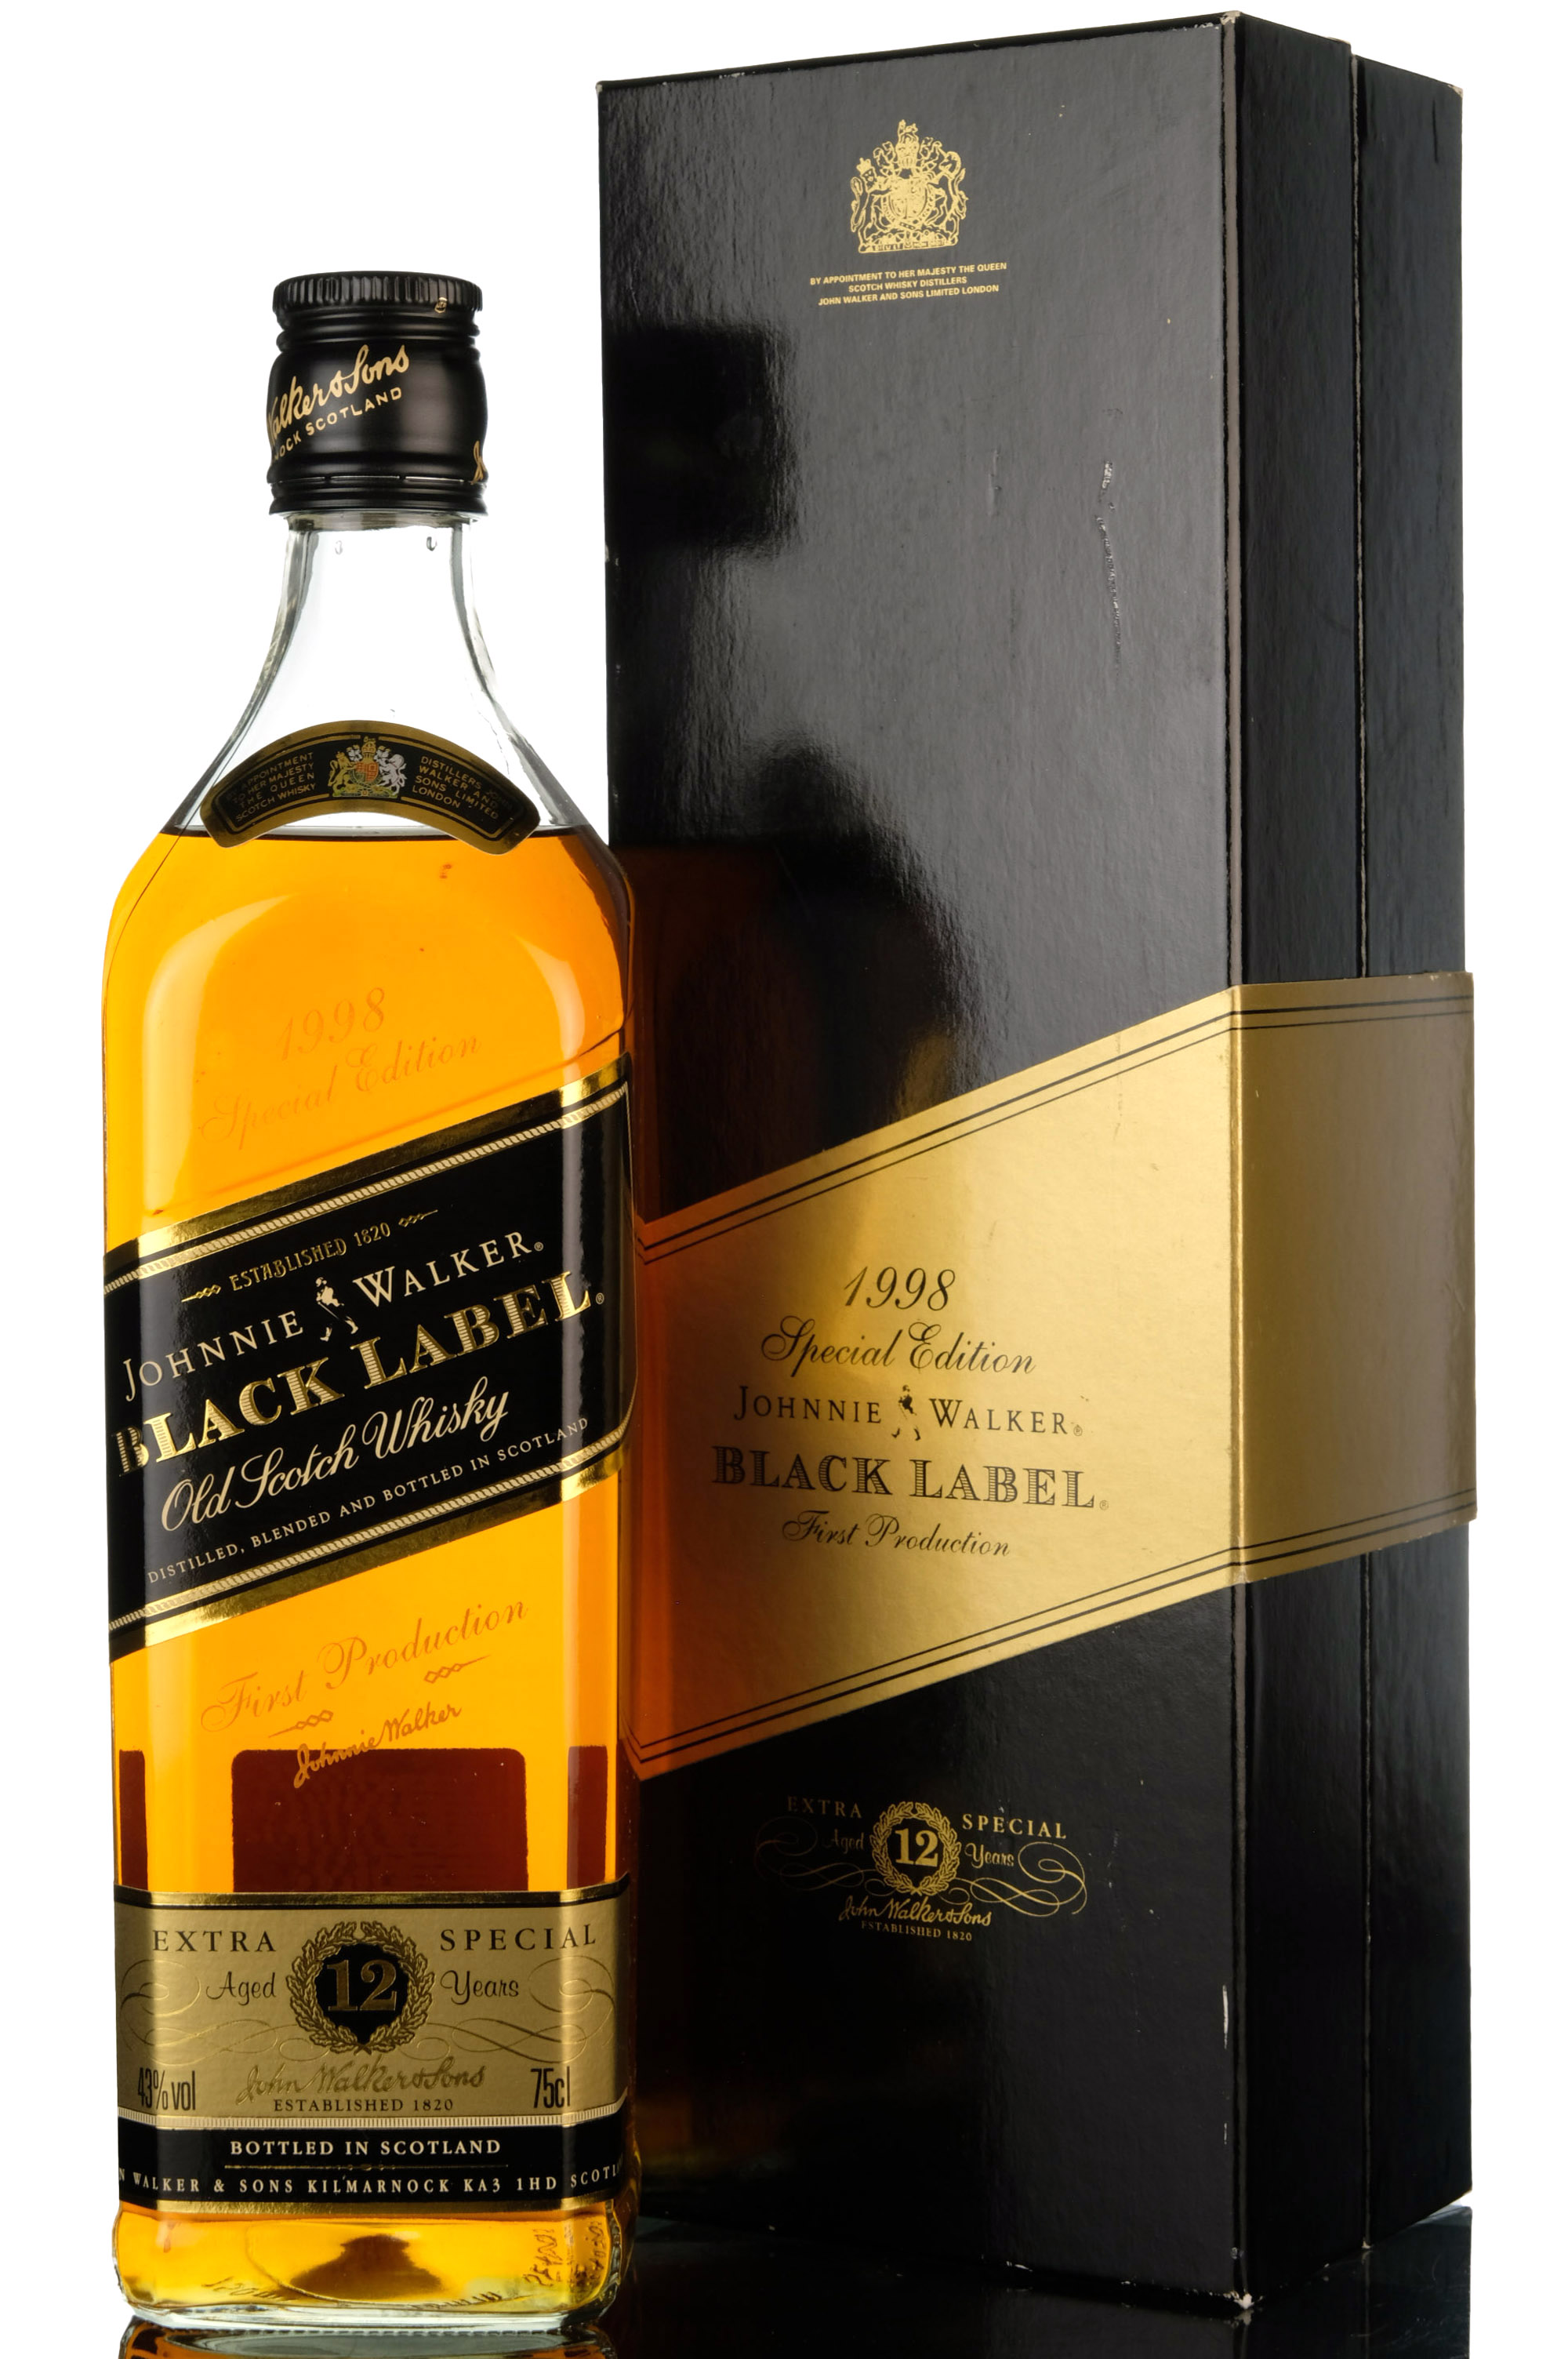 Johnnie Walker 12 Year Old - Black Label - Extra Special - First Production 1998